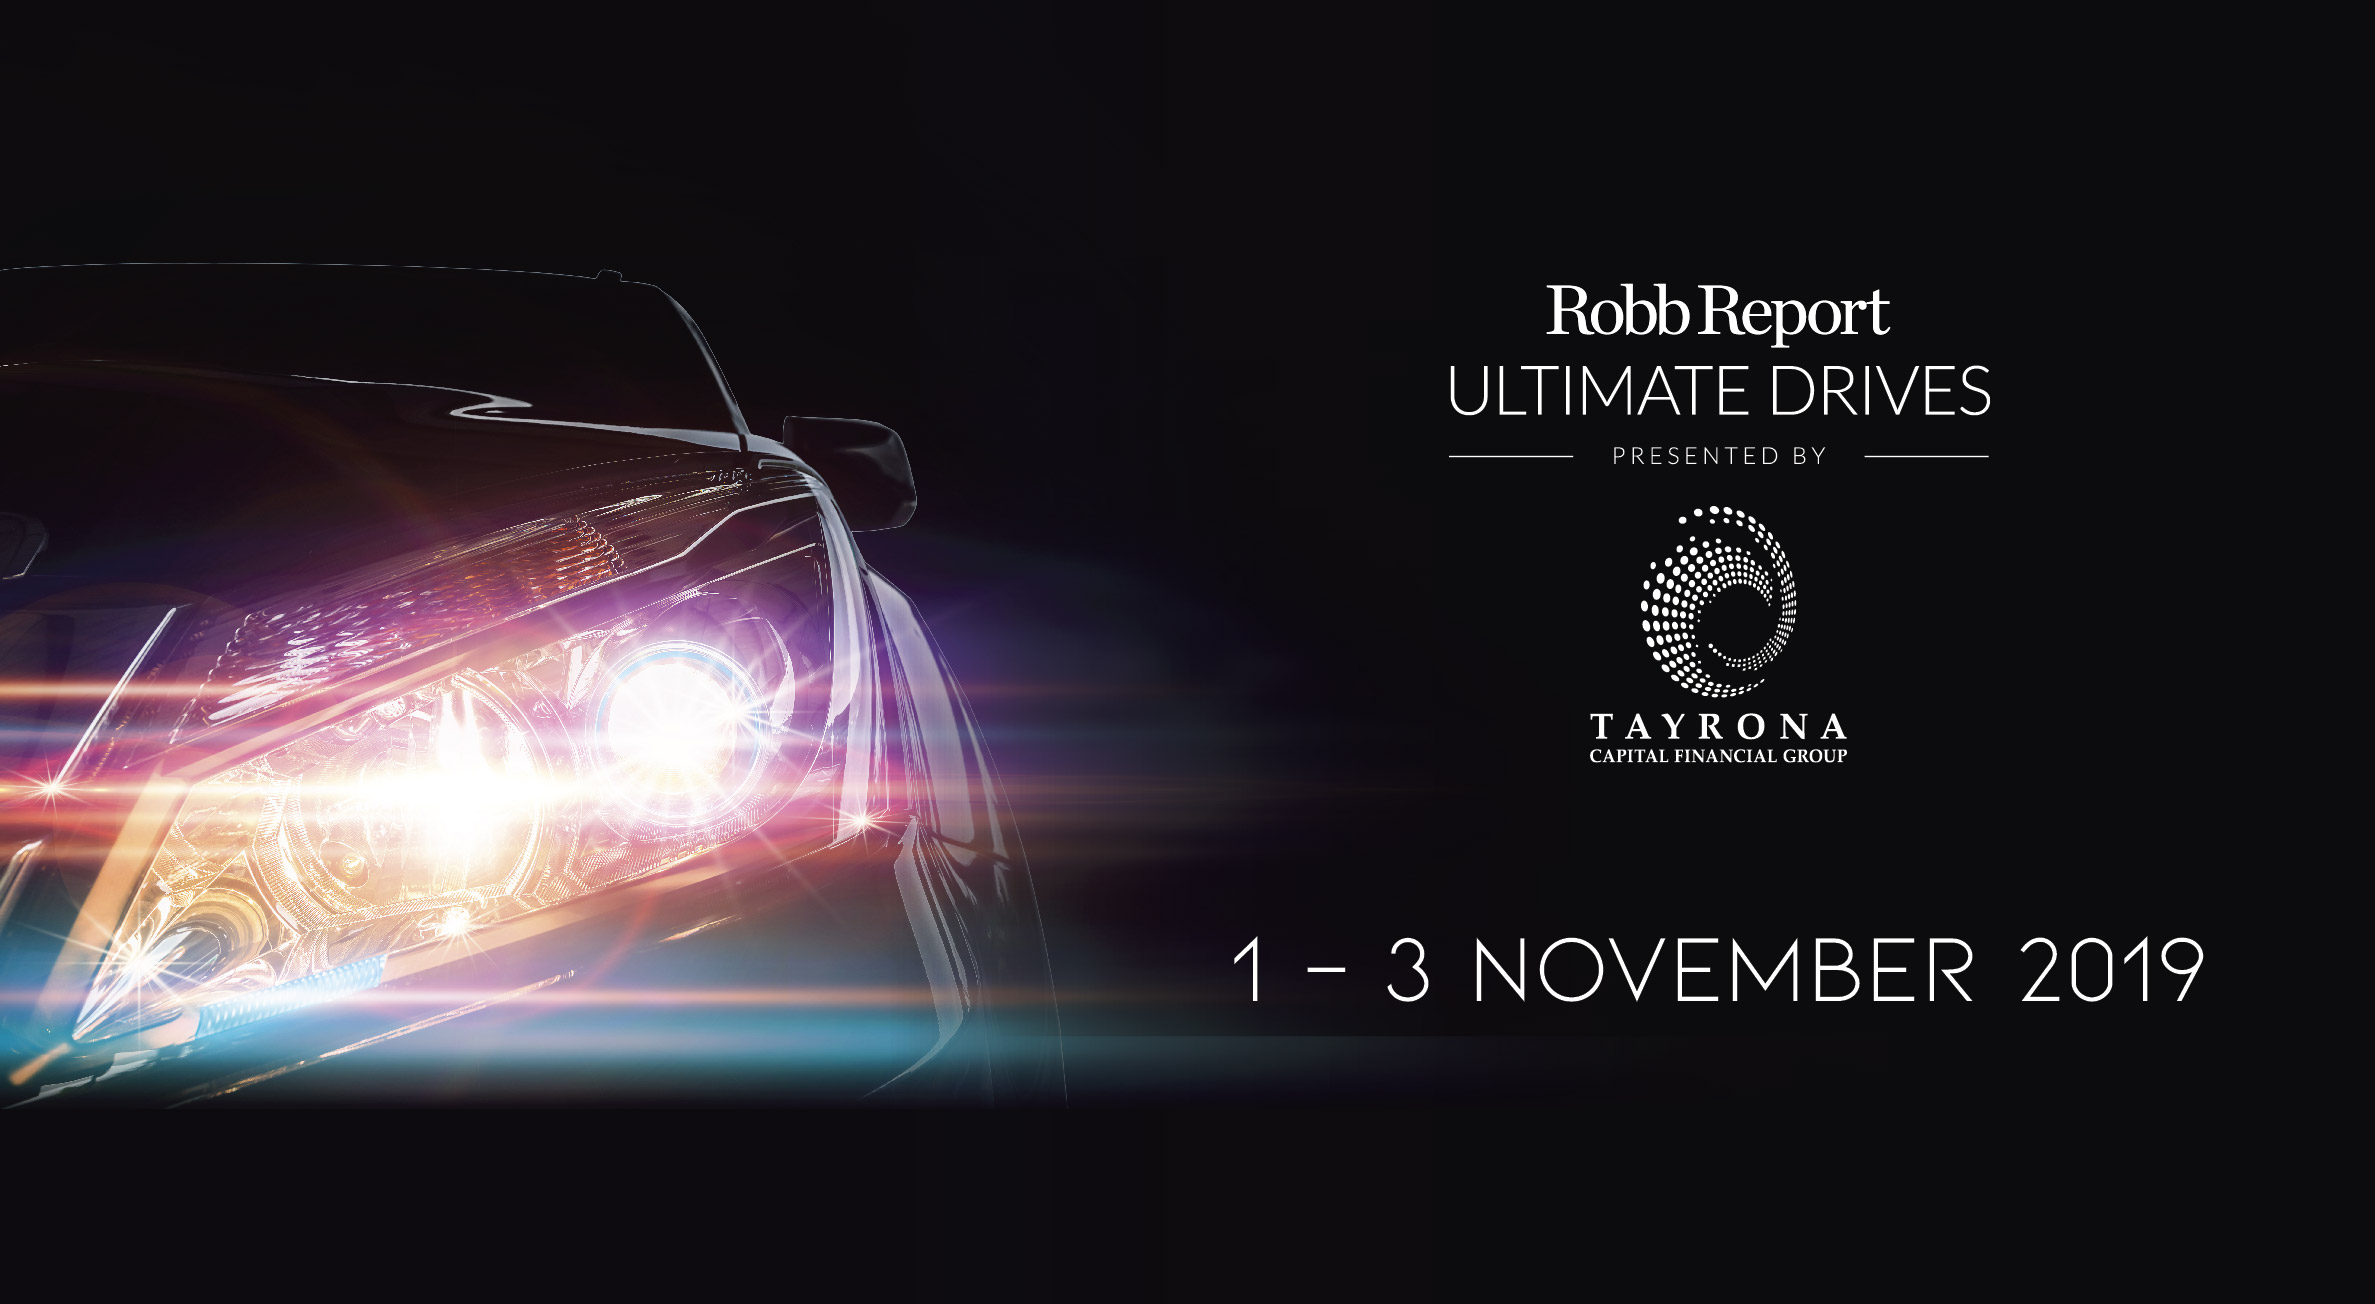 Robb Report Ultimate Drives 2019